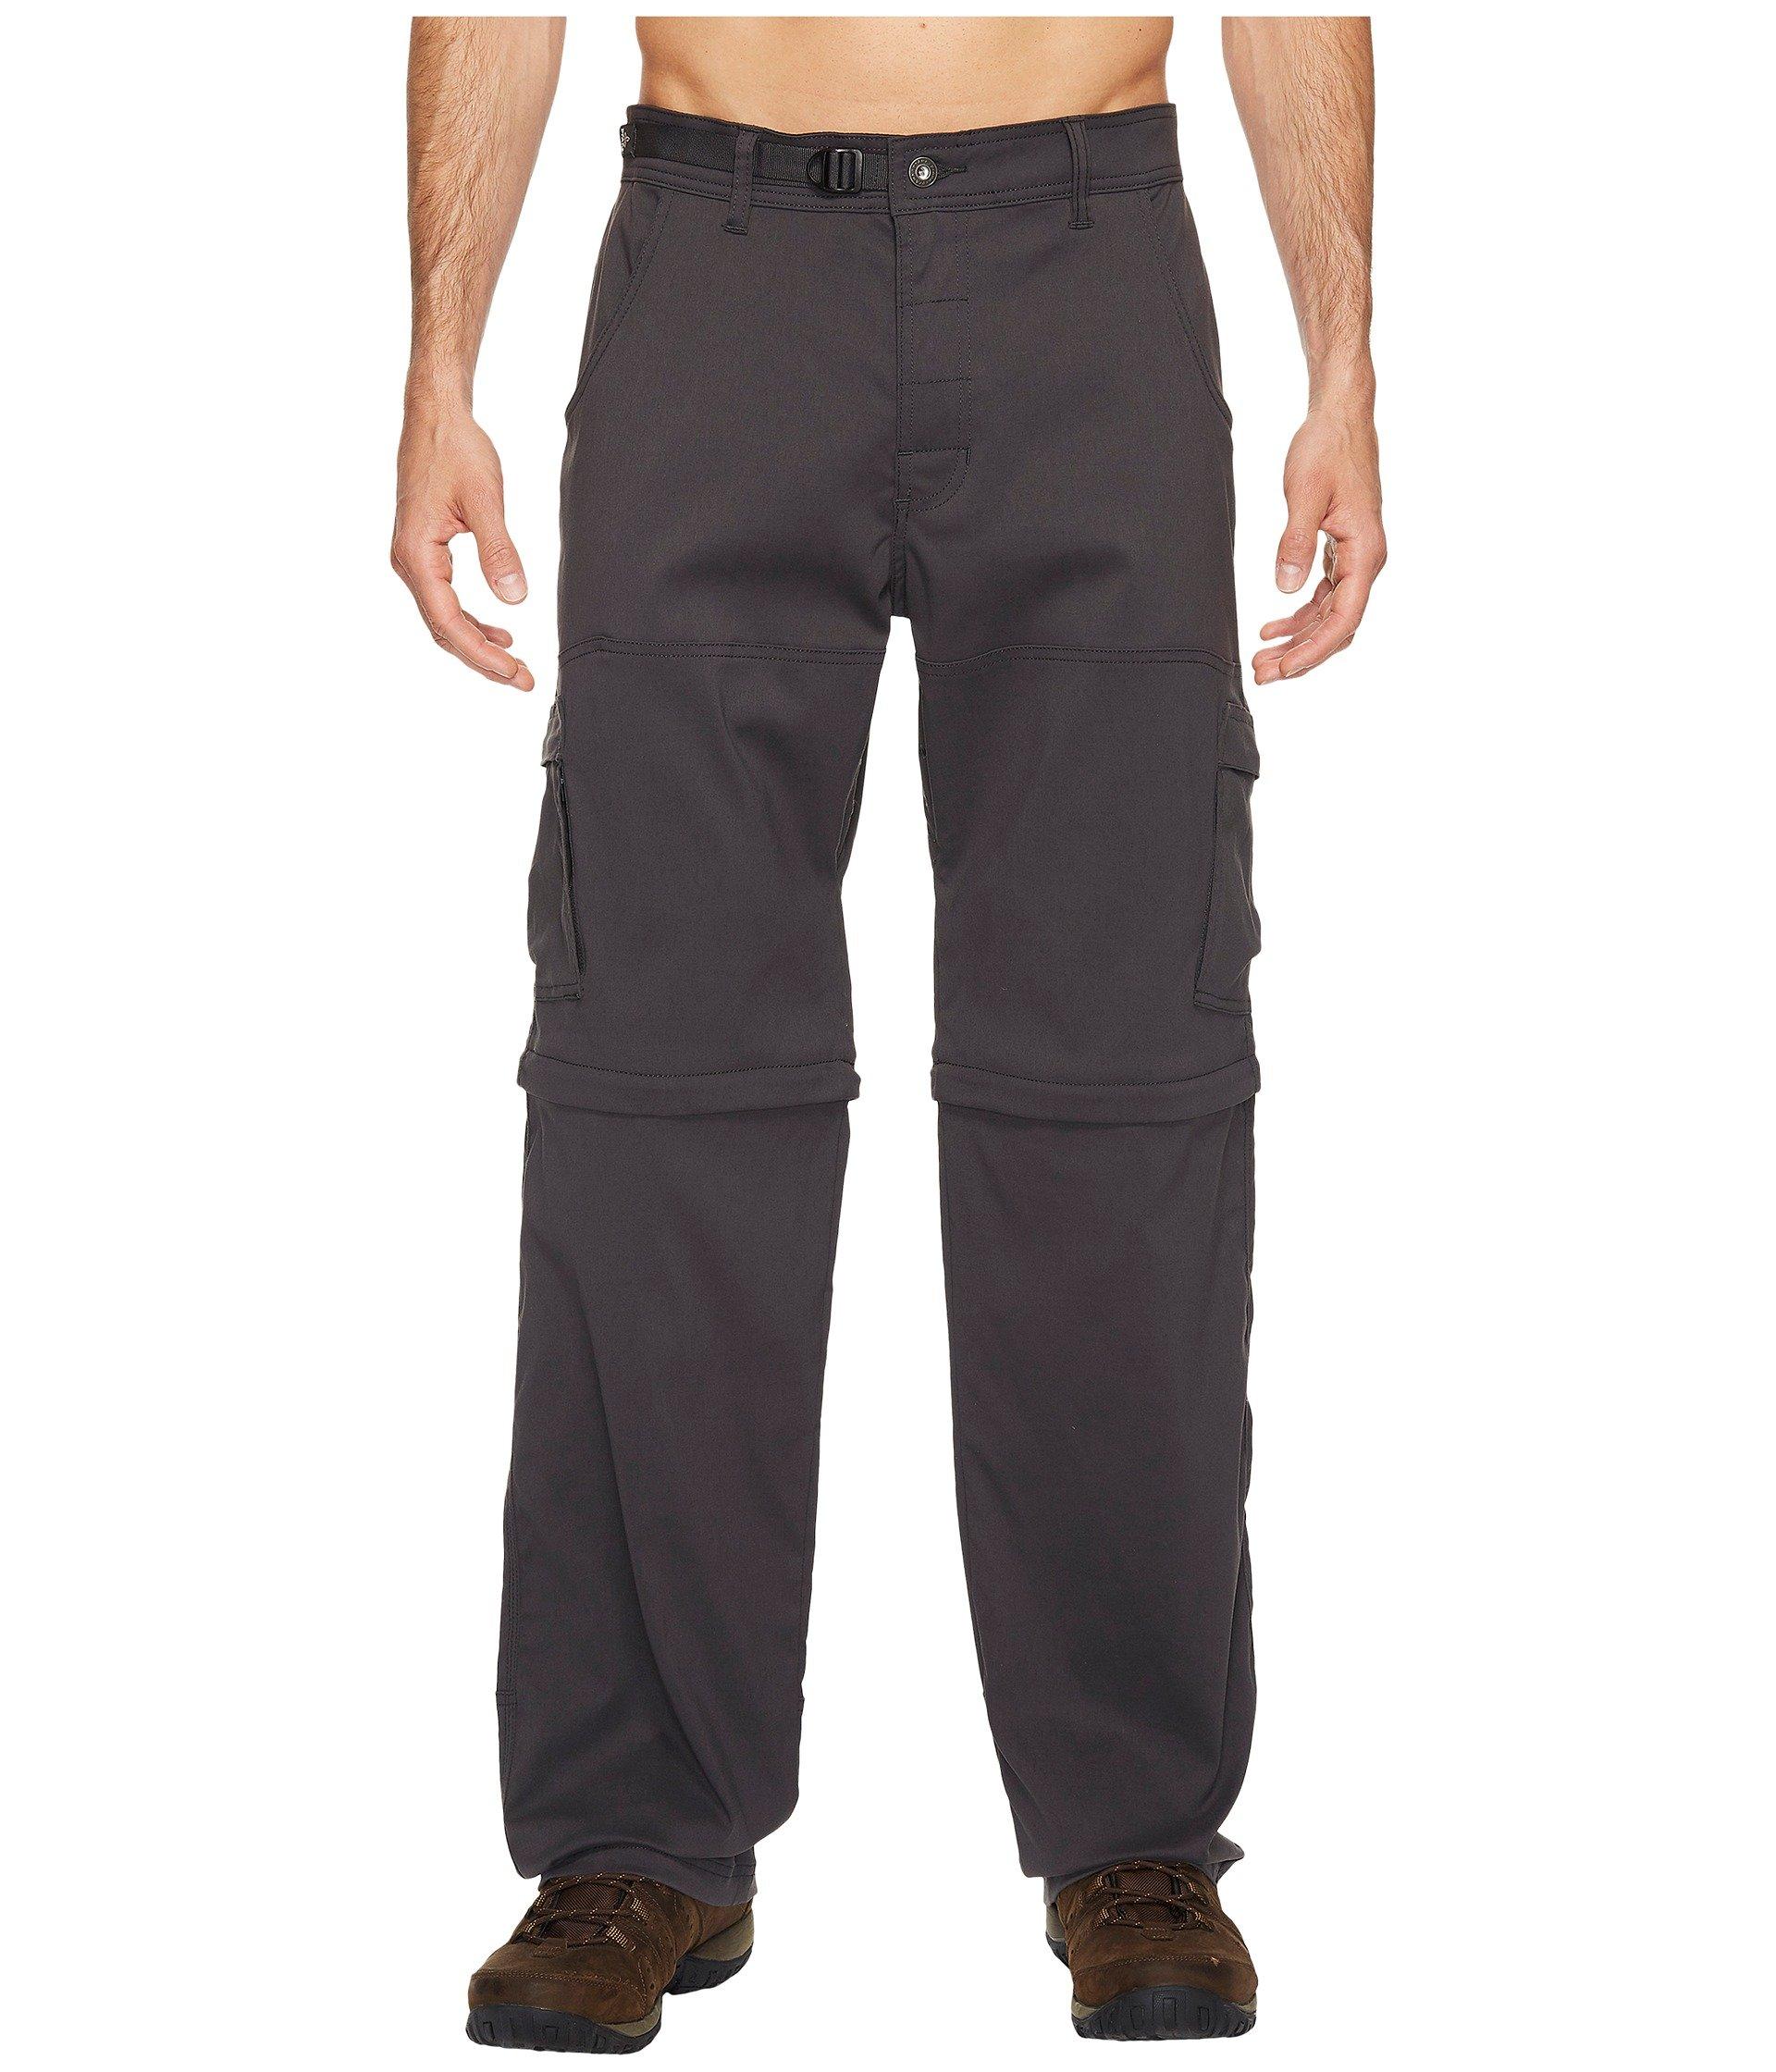 Prana Synthetic Stretch Zion Convertible Pant in Gray for Men - Lyst